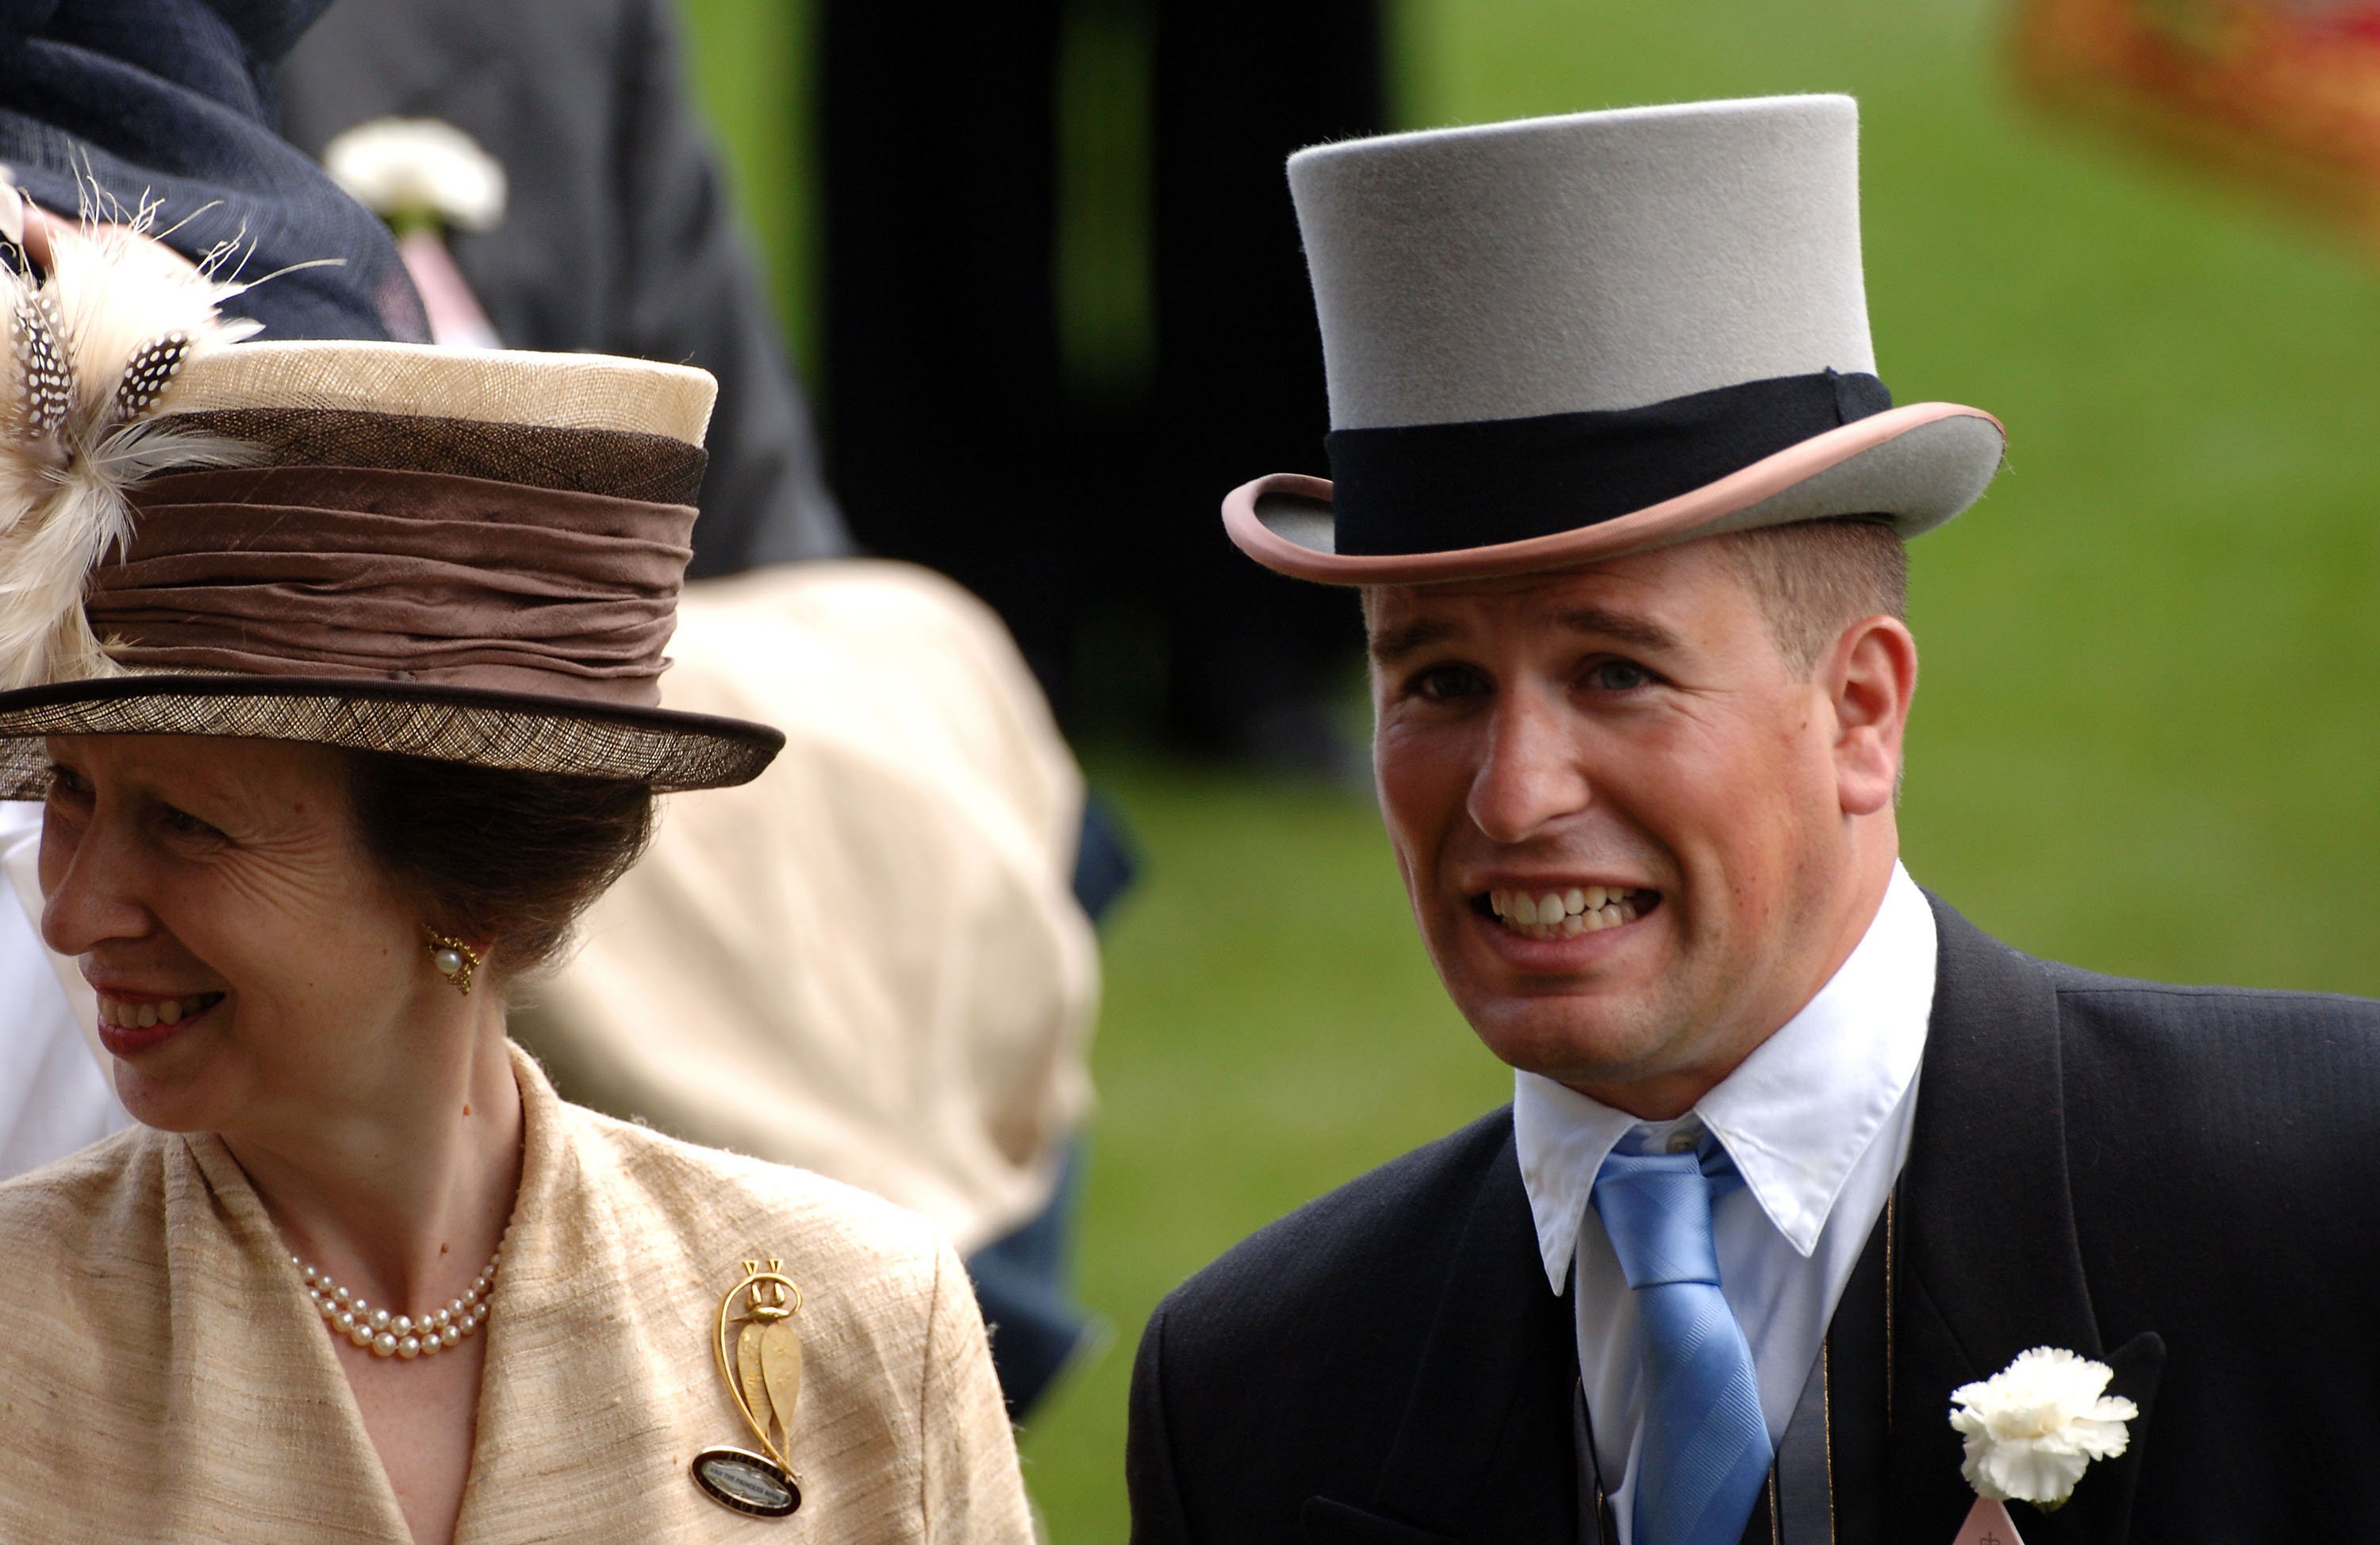 Photo taken of Princess Anne smiling while standing next to her son, Peter Phillips, at the Royal Ascot